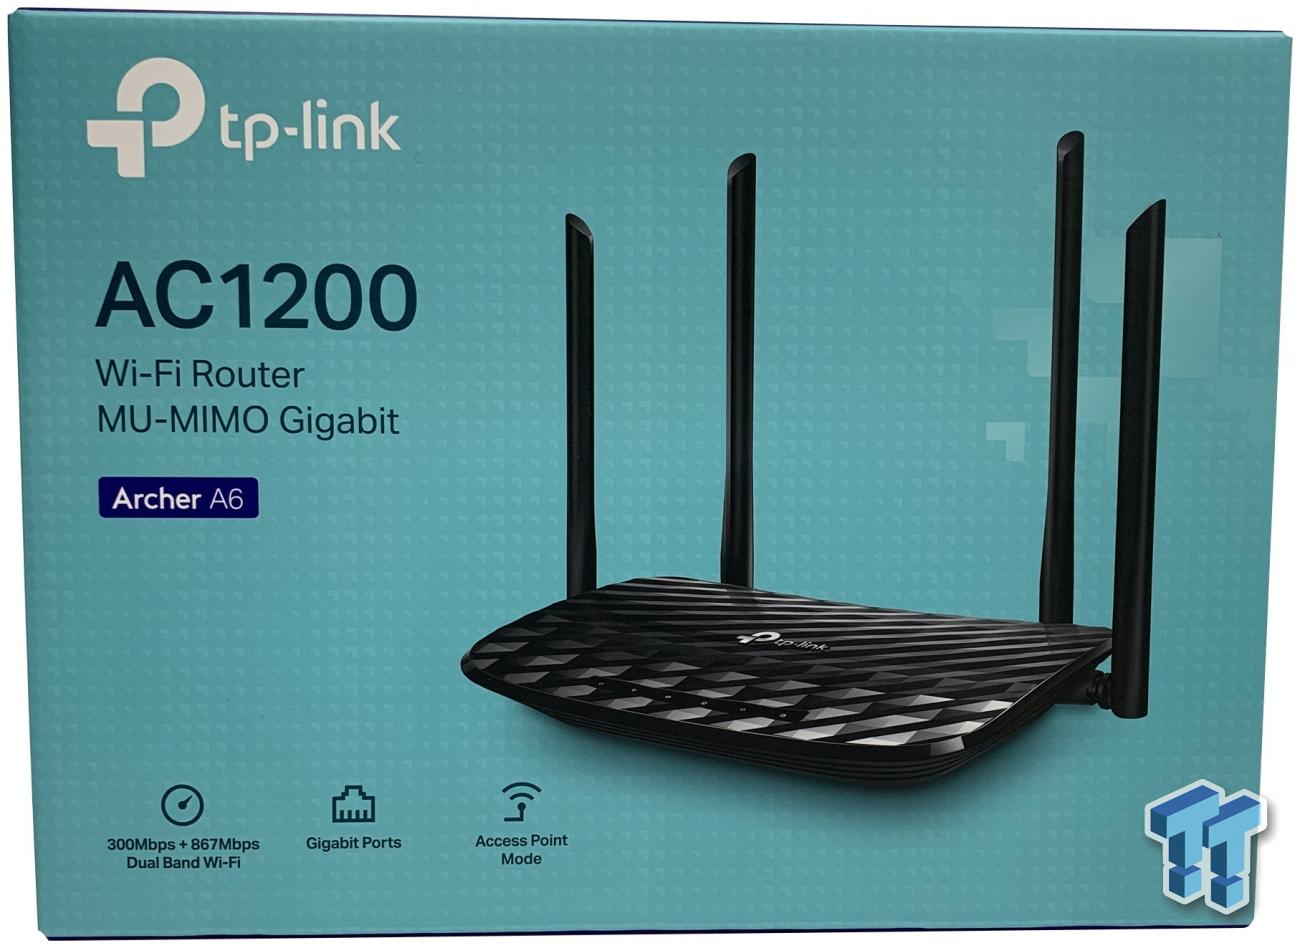 historie sovende 945 TPLink Archer A6 Wireless Router Review